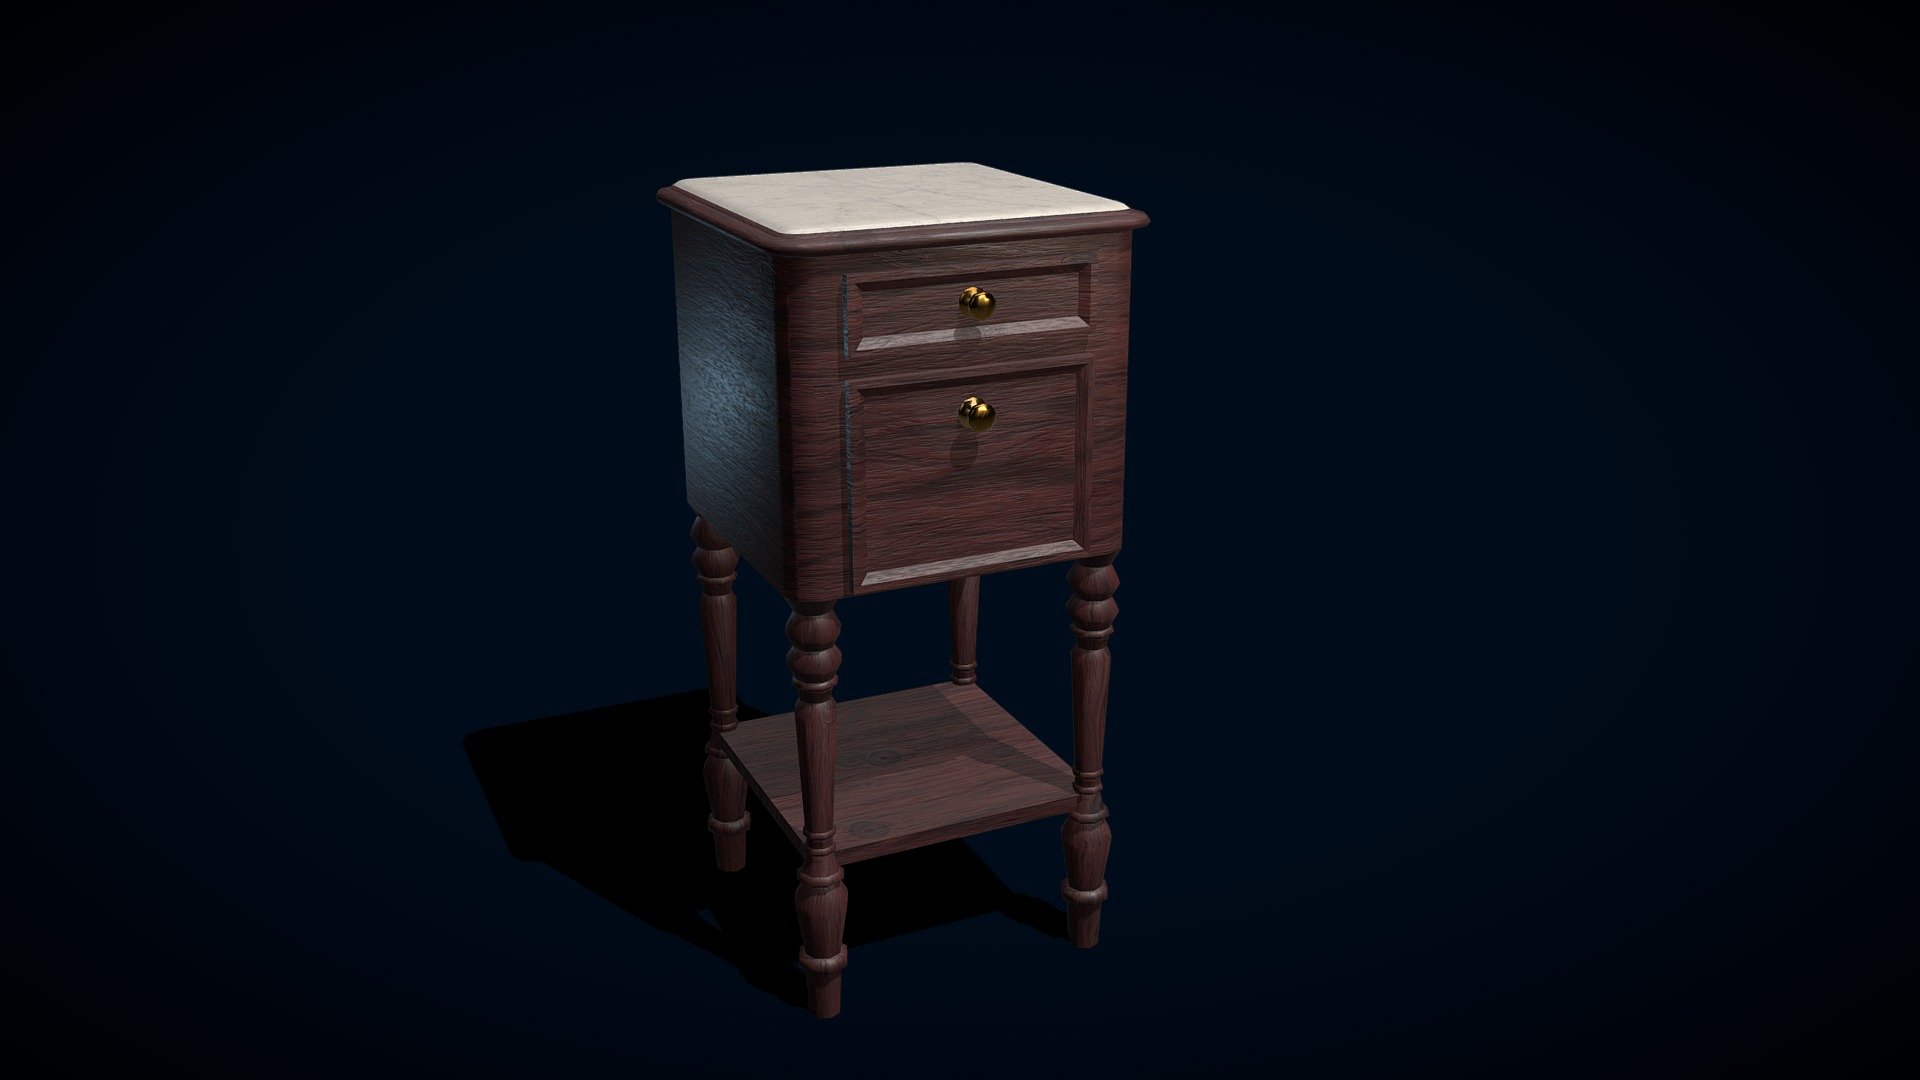 A dark wooden cabinet. Can be used for example in a bedroom or living room scene, or in a video game.

Drawers are rigged and can be opened. The model includes textures, all of which are 2k resolution and CC0 licenced, meaning you can use them anywhere, for any purpose. The model is UV mapped as a non-overlapping version to be used in texture painting for example, and also a tiled, overlapping version, seen on the preview images. It also has basic PBR materials for Blender Cycles rendering engine.

The textures and rigged and .blend version are located in the additional file included in the downlos

The models is made up from quads and triangles only. The model is low poly and ready for game implementation.

Vertex count is 1208 and poly count is 1201 3d model